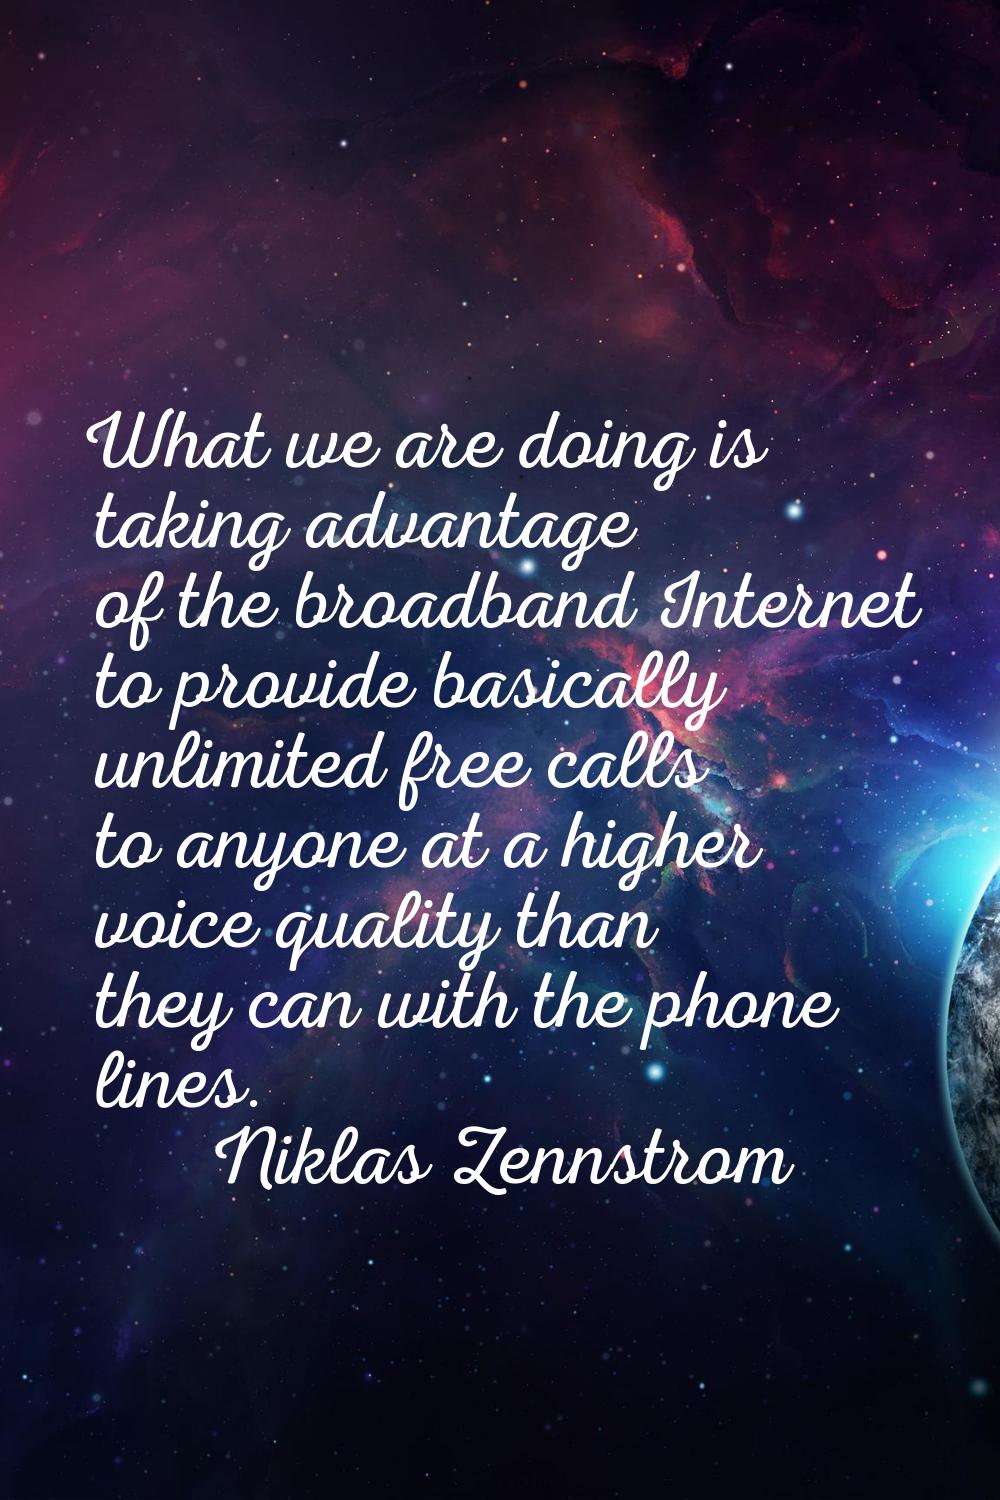 What we are doing is taking advantage of the broadband Internet to provide basically unlimited free